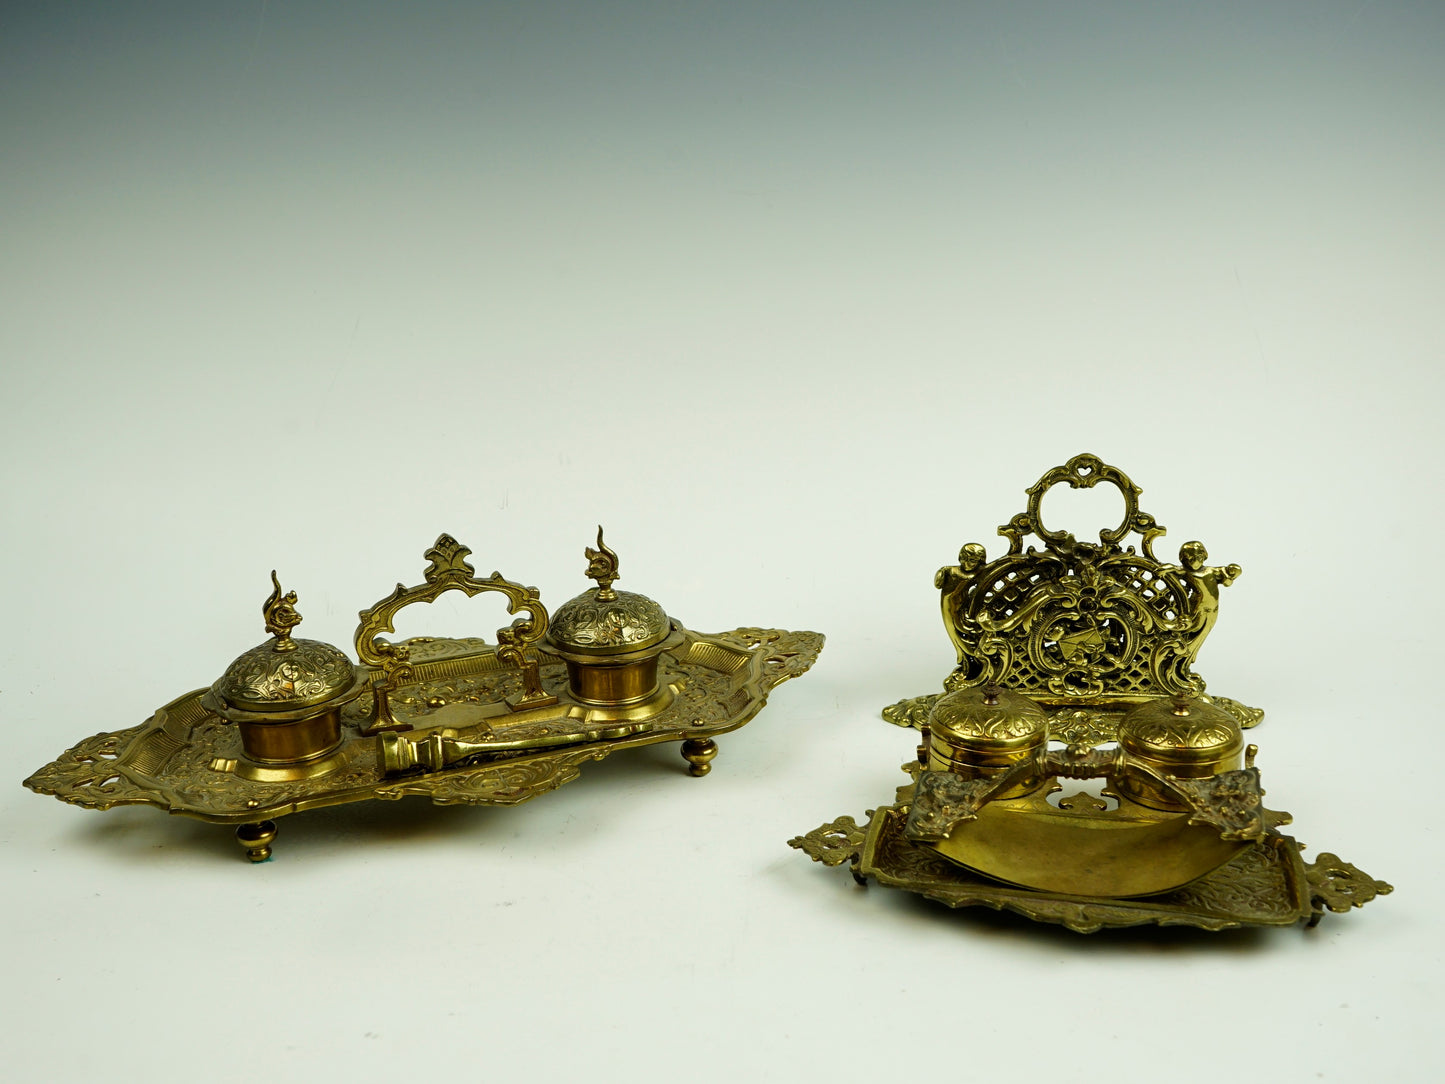 VINTAGE ITALIAN FLORENCE BRASS INKWELLS LARGE ROCOCO STYLE ORNATE STAND